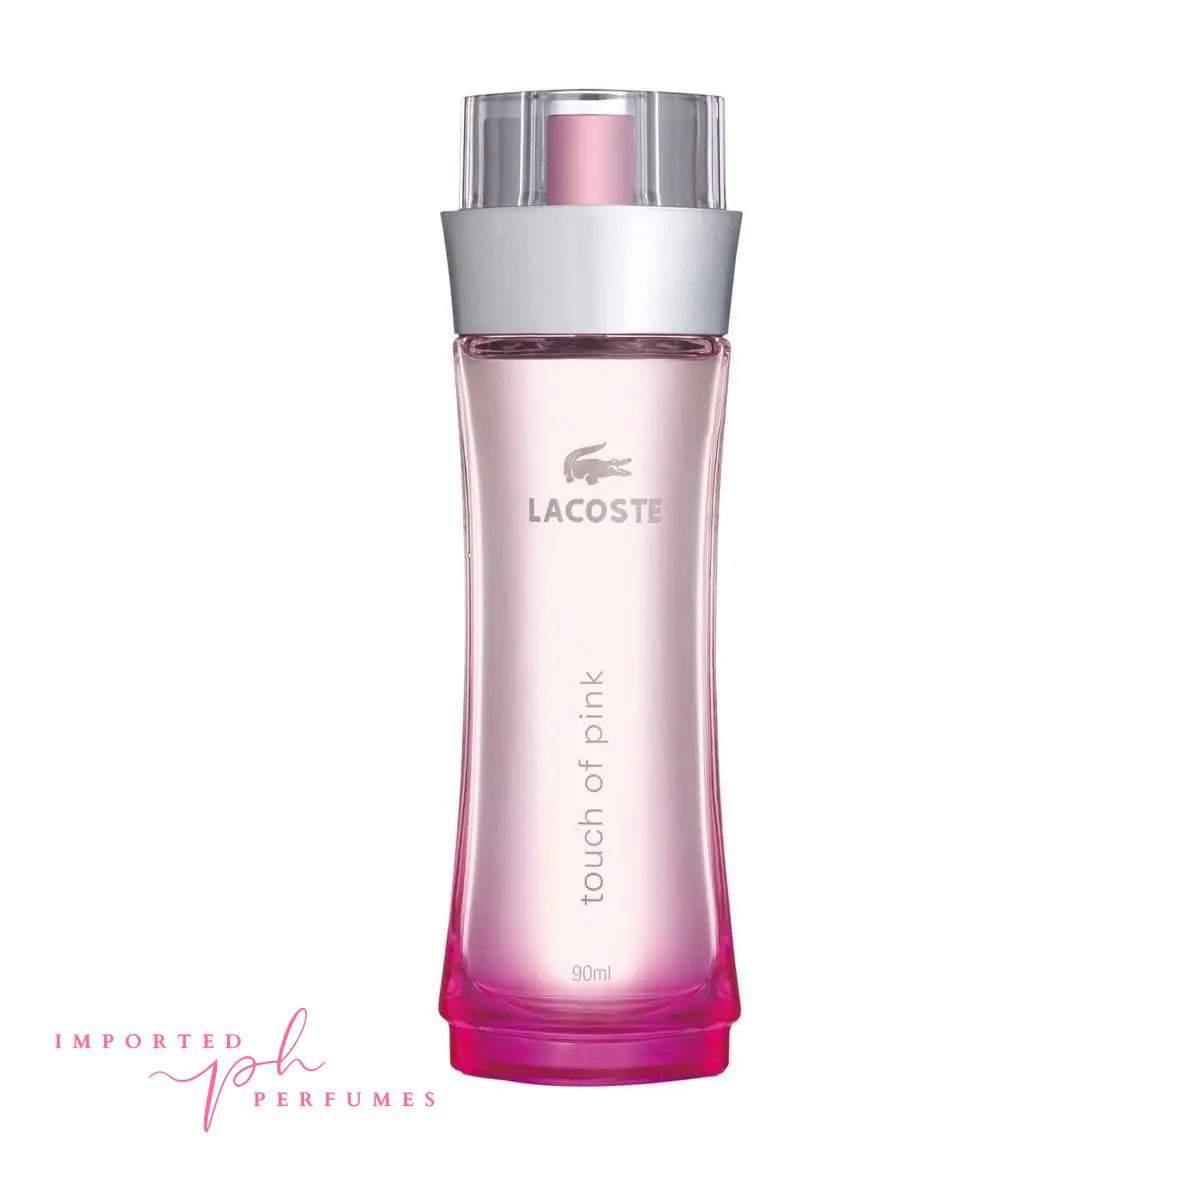 Lacoste Touch of Pink Eau de Toilette For Women 90ml-Imported Perfumes Co-Lacoste,pink,touch of pink,women